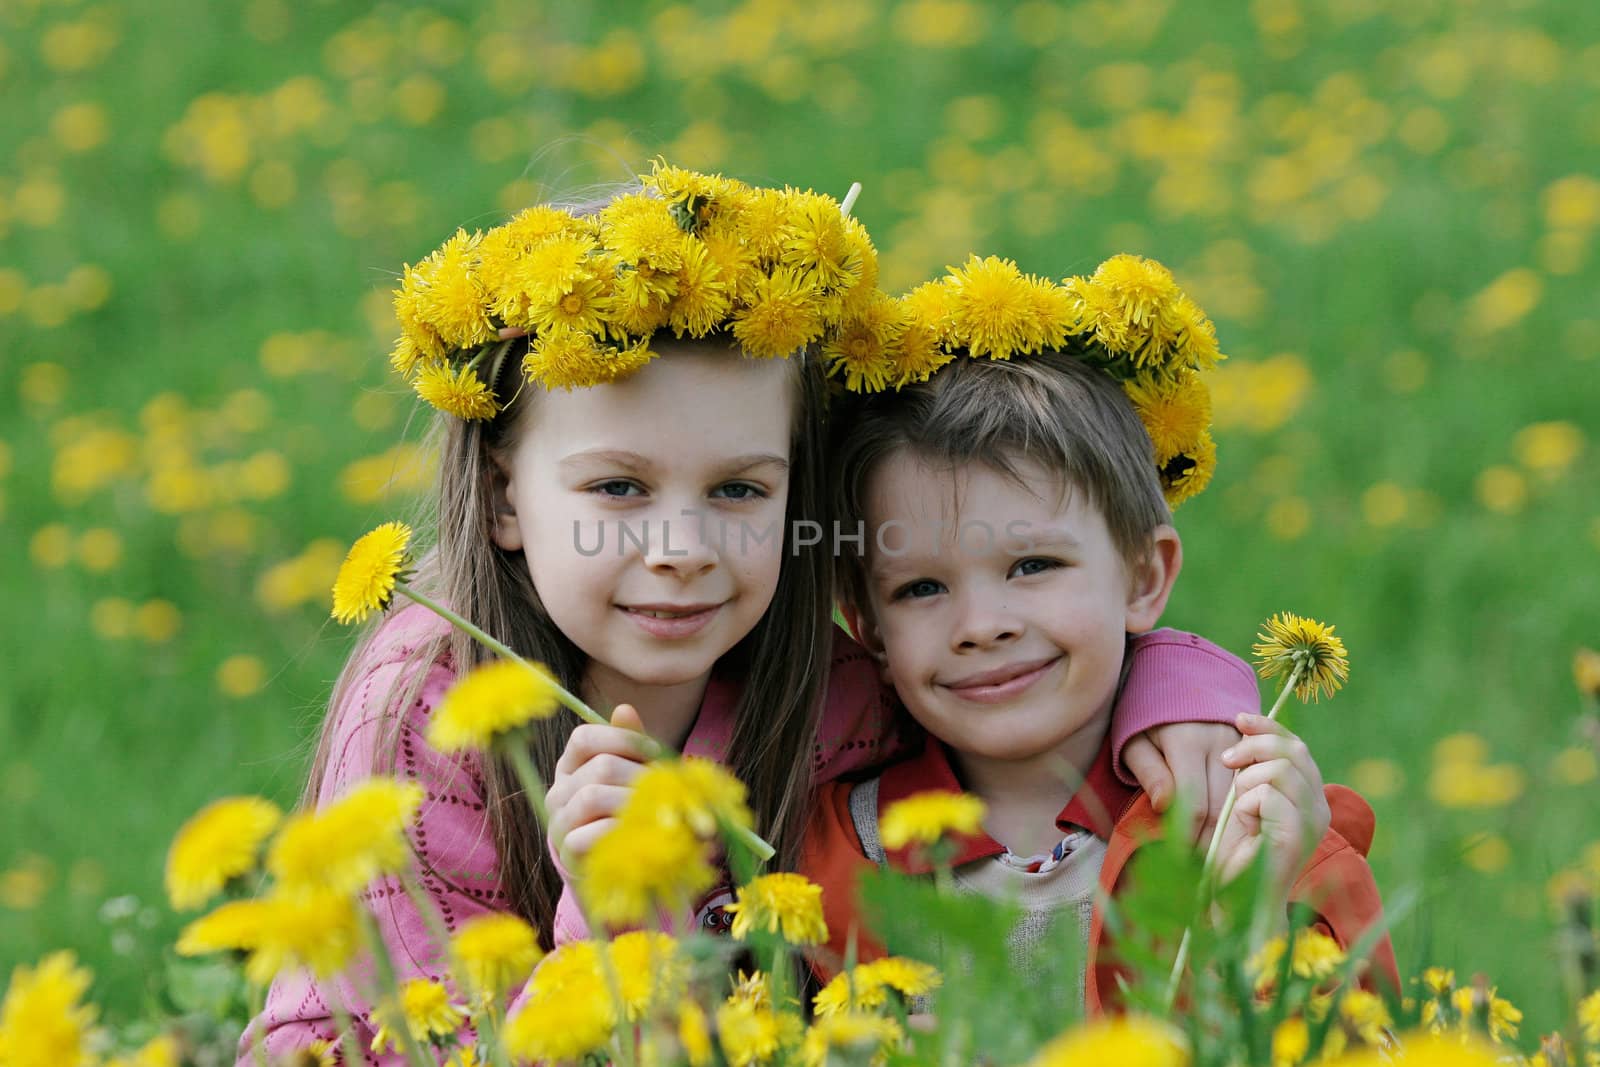 Brother and sister enjoy summer time in the dandelion meadow.